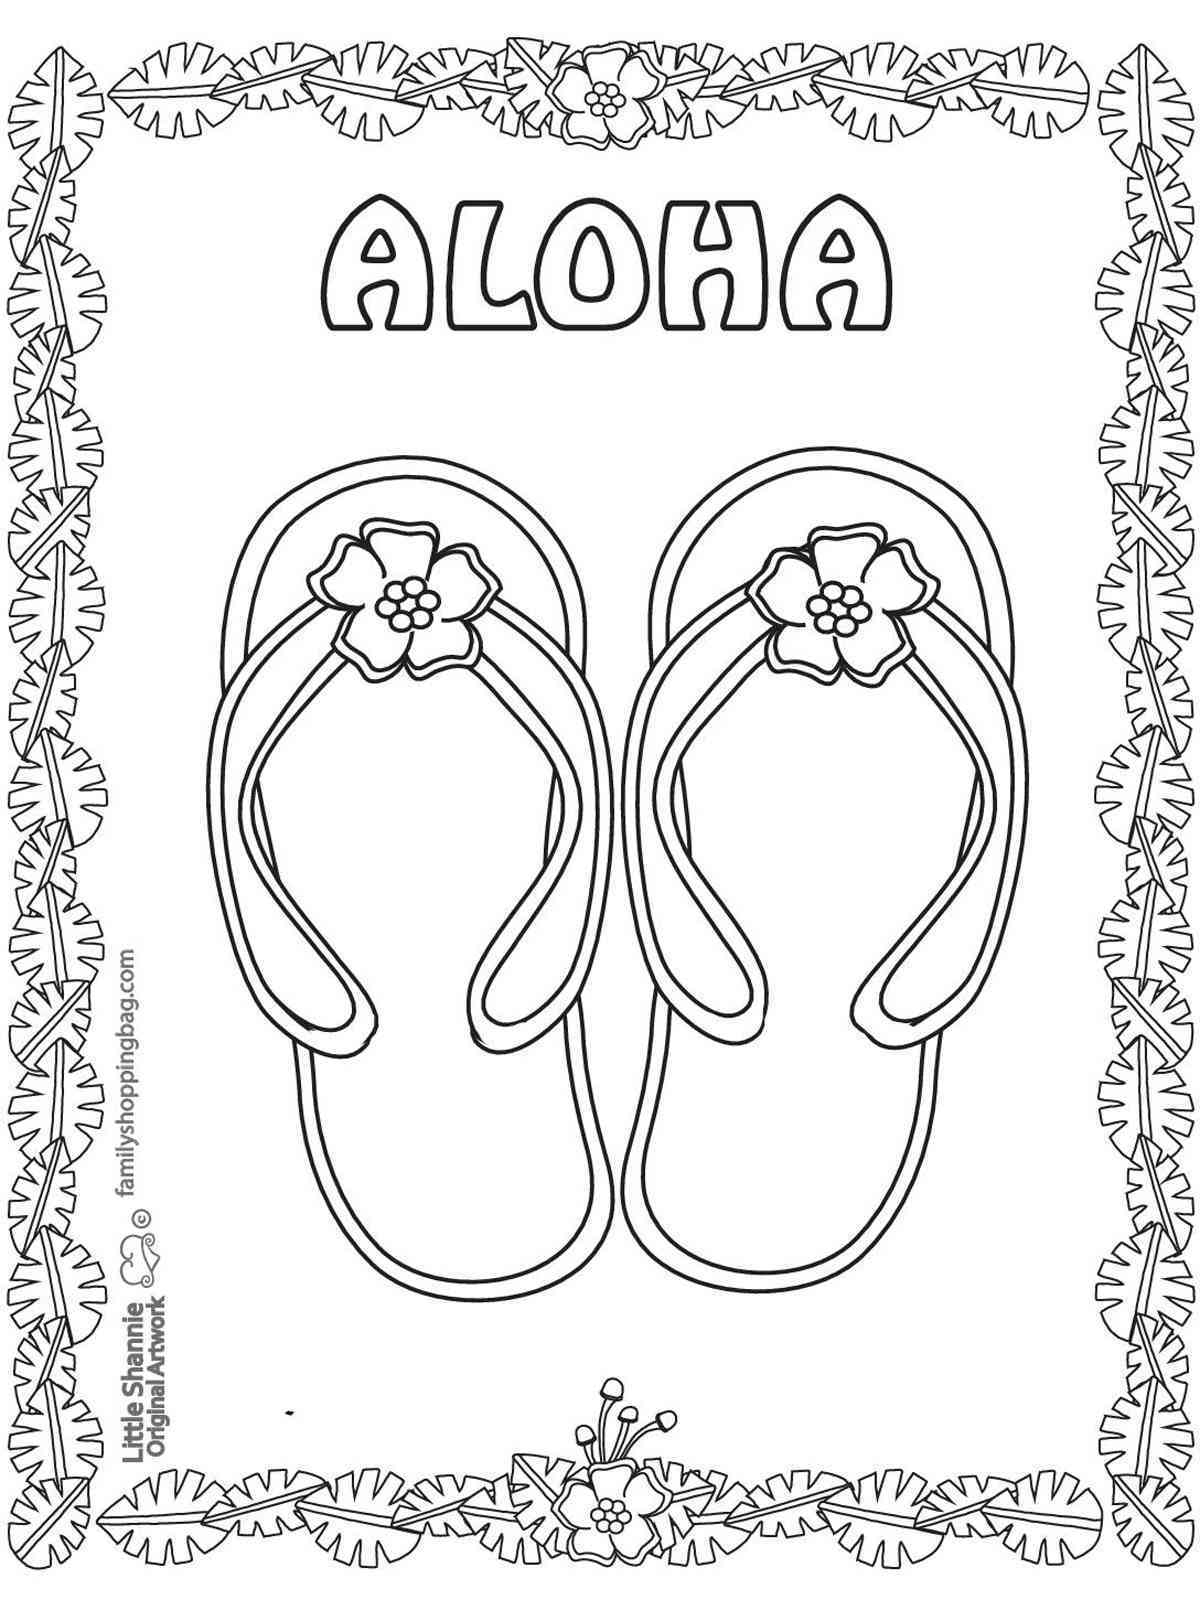 Free Aloha! coloring pages. Download and print Aloha! coloring pages